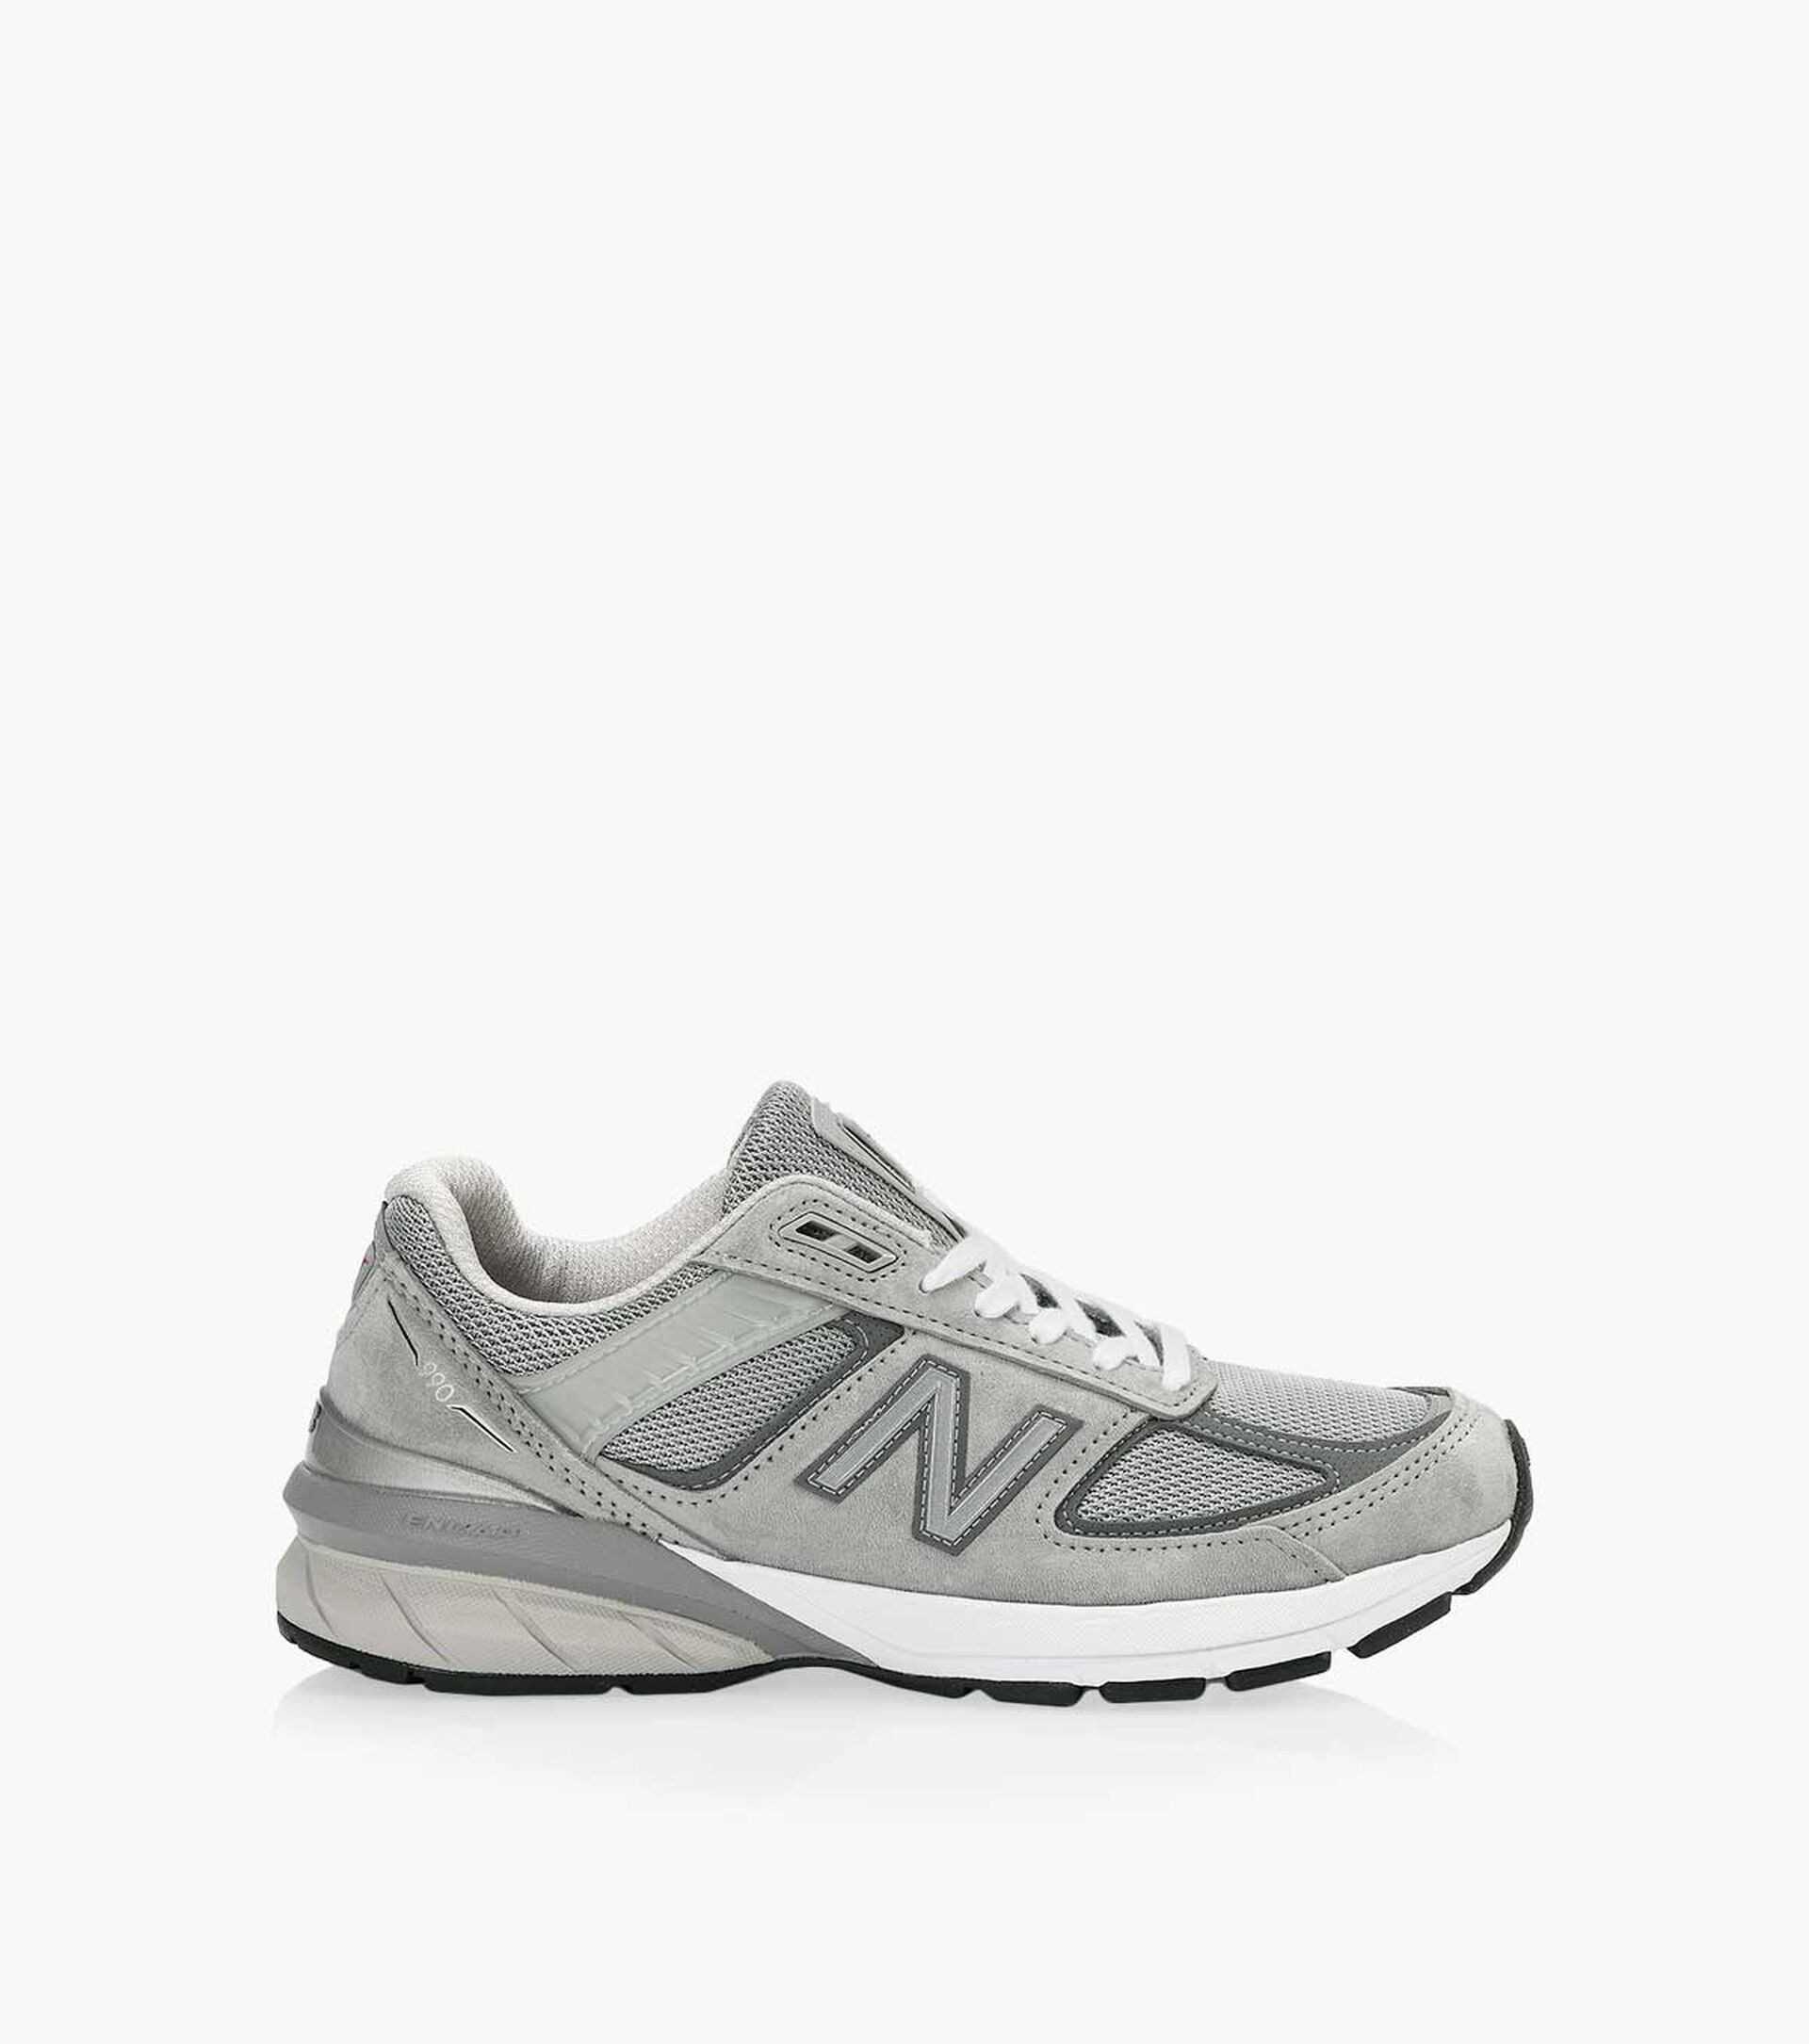 NEW BALANCE 990 - Grey Fabric | Browns Shoes